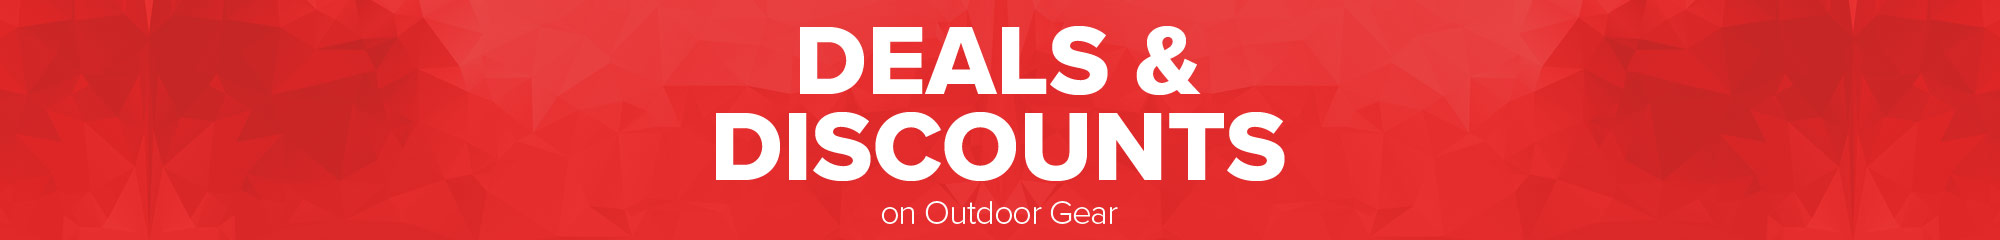 Deals and discounts on outdoor gear